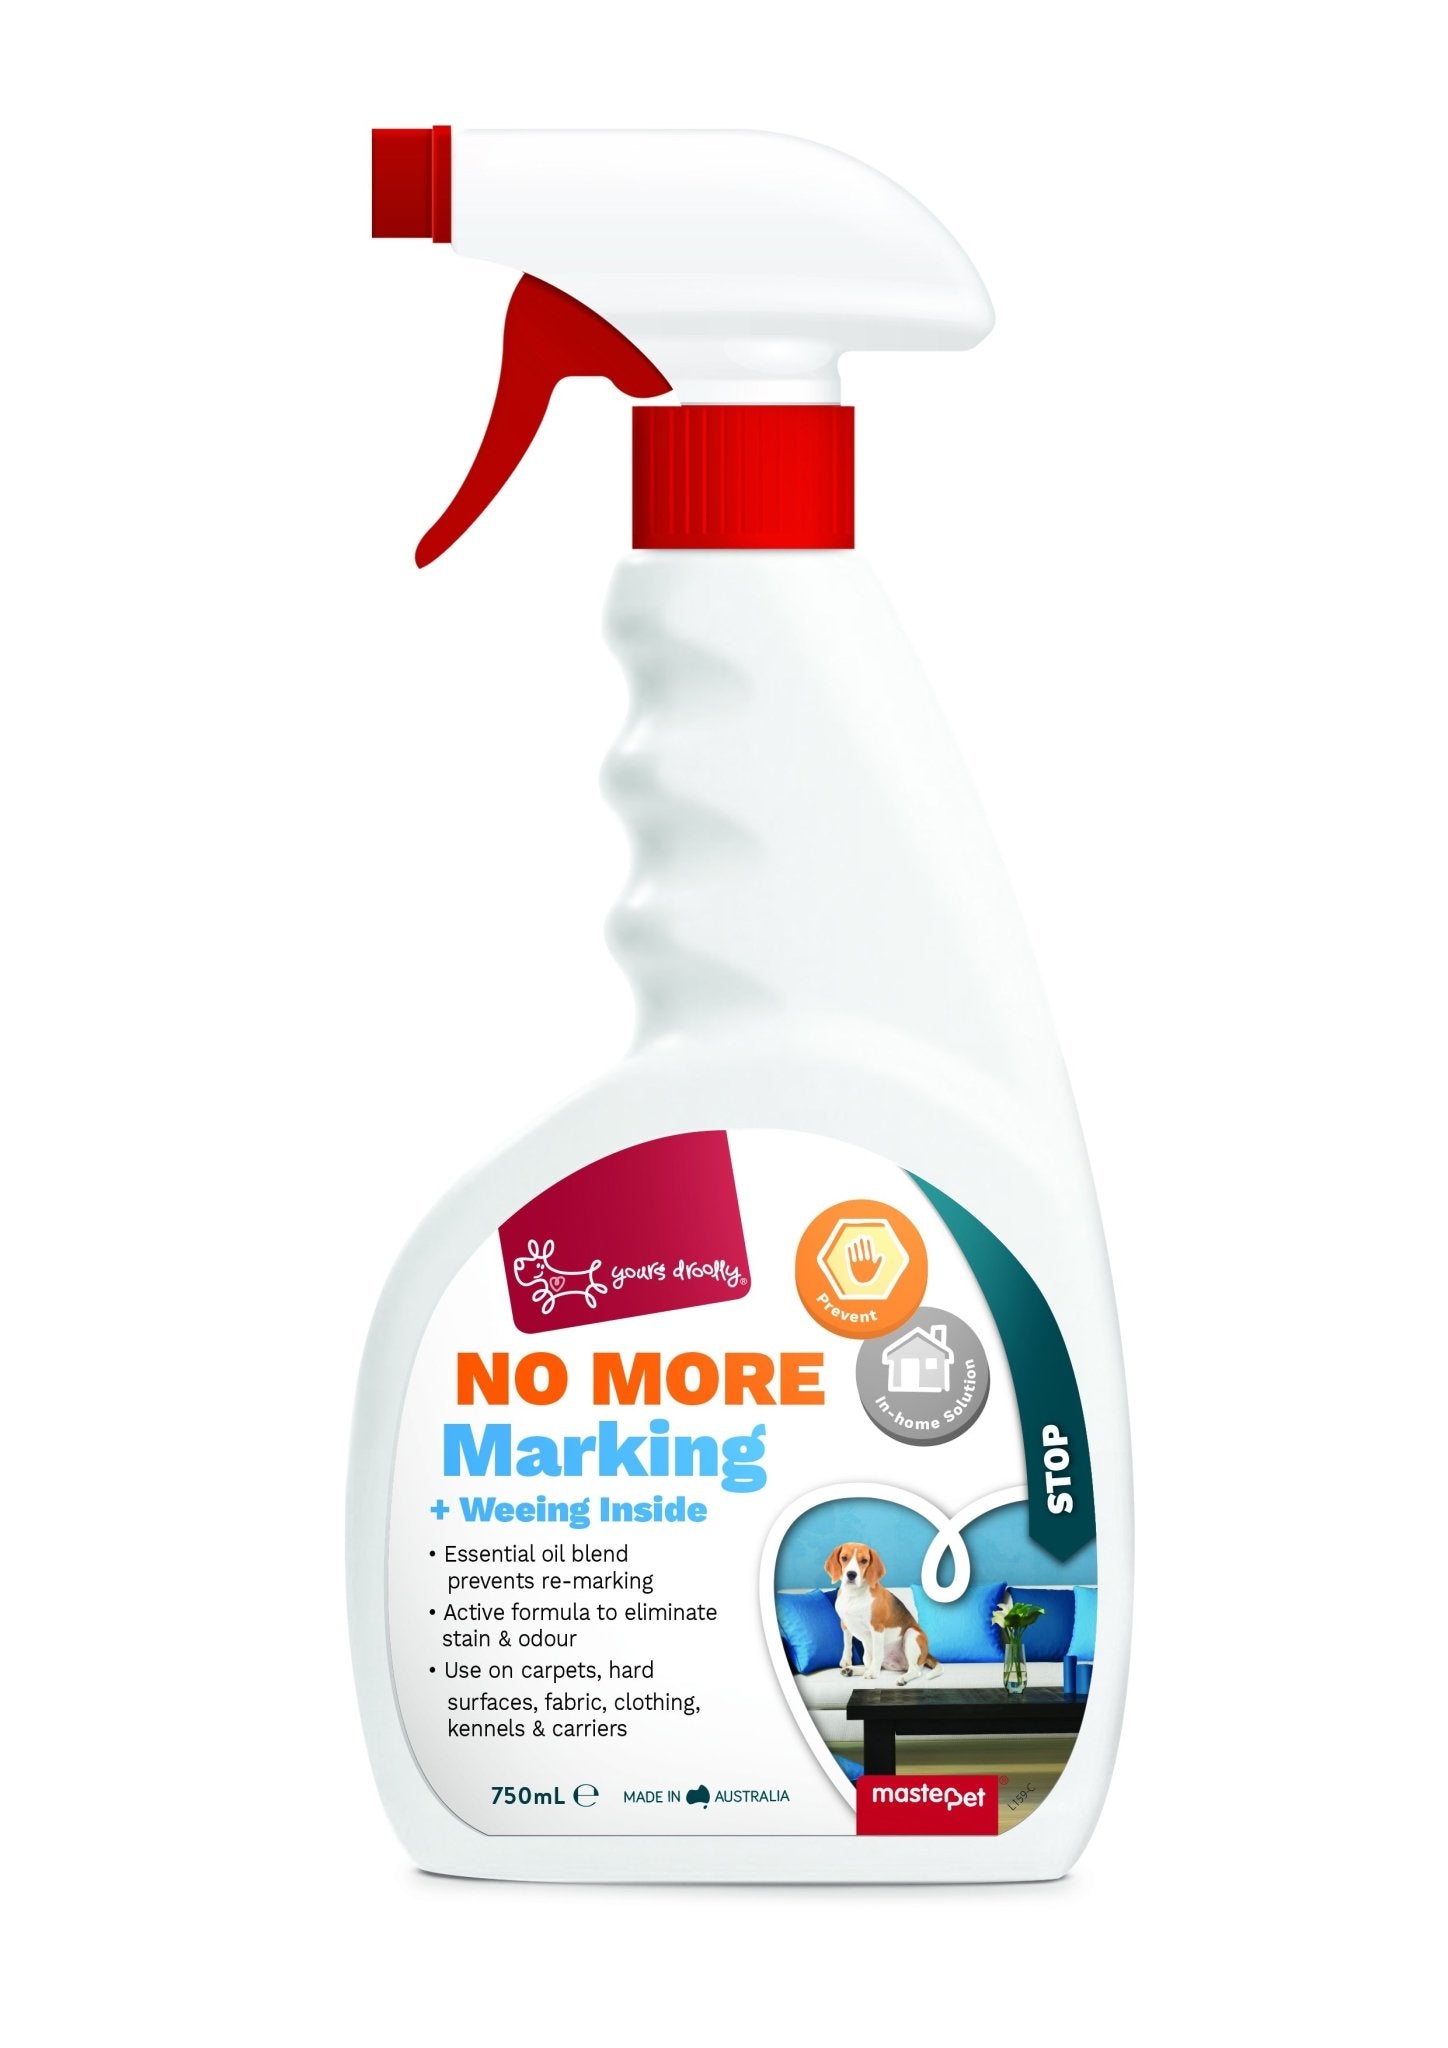 Yours Droolly No More Marking Inside 750ml - Woonona Petfood & Produce